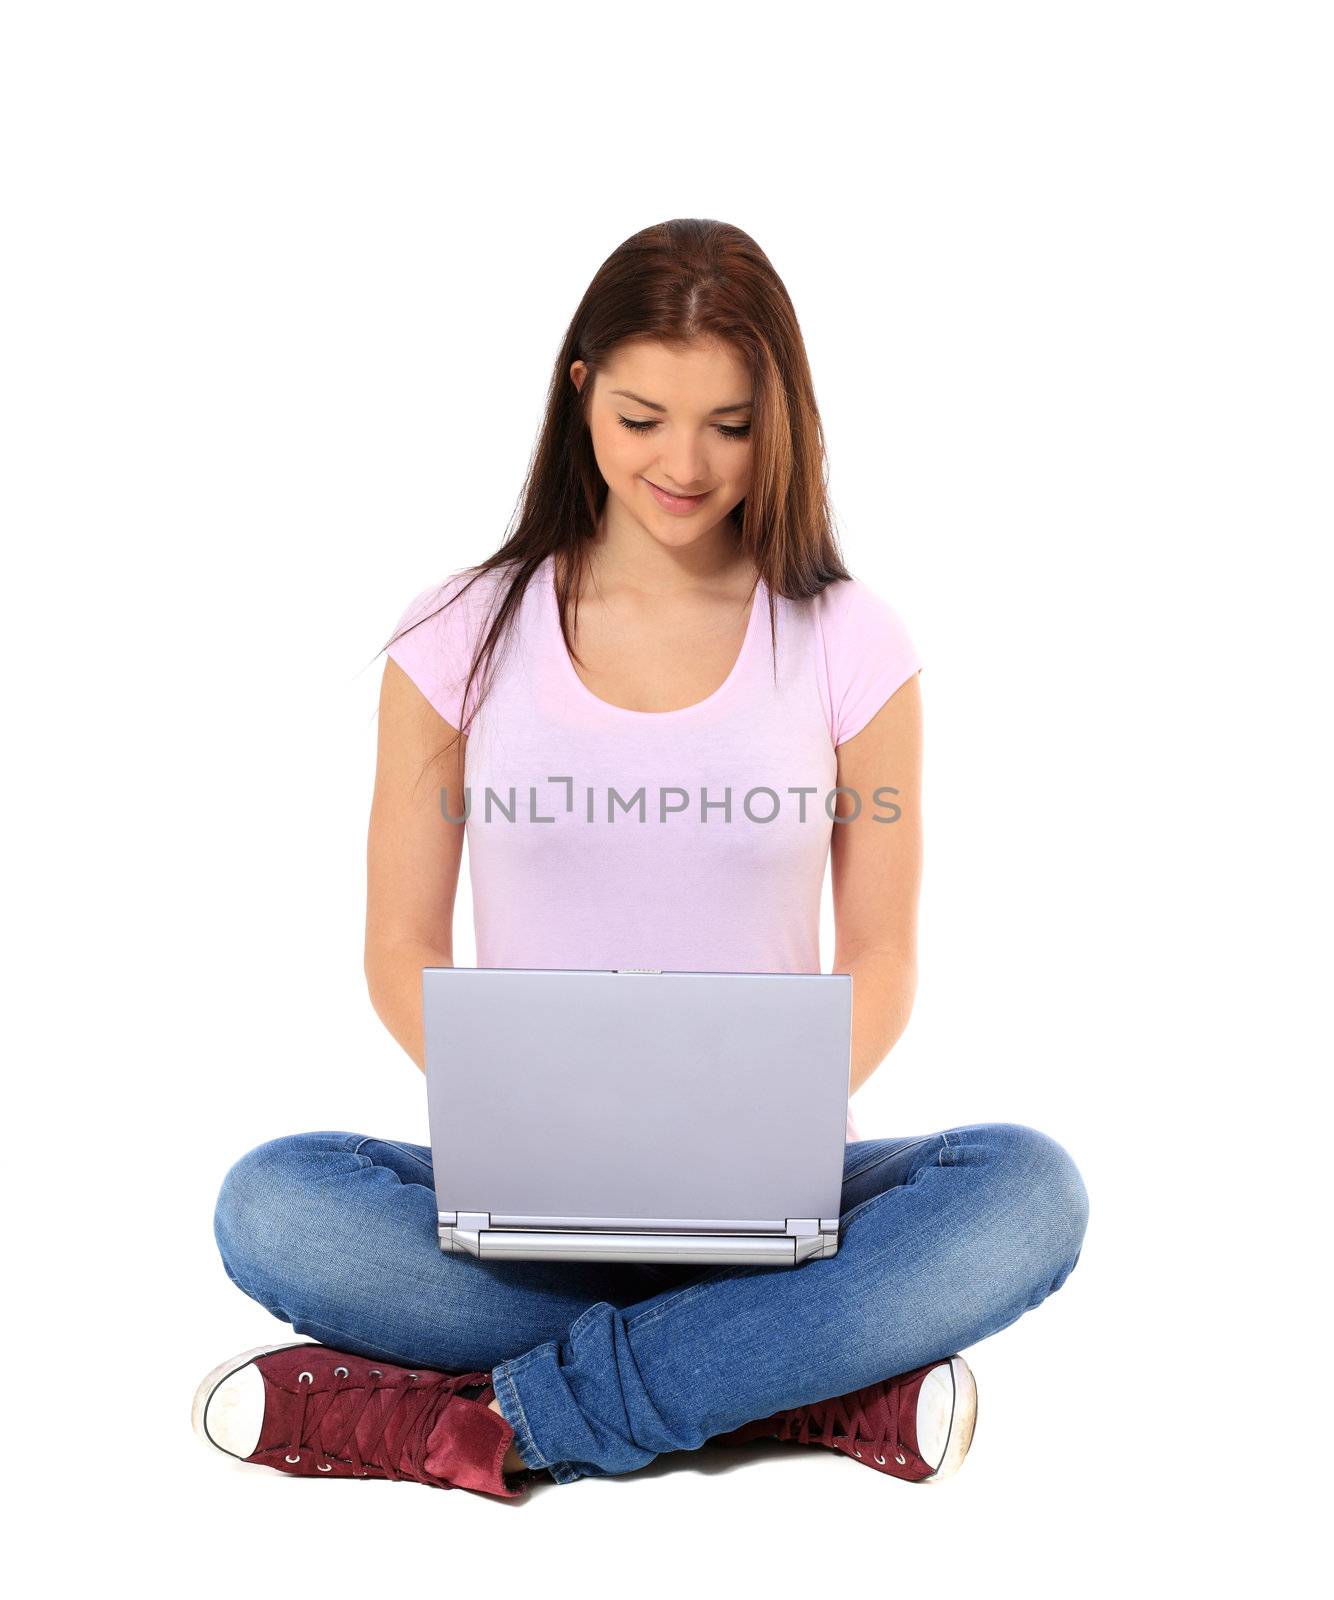 Attractive teenage girl using notebook computer. All on white background.